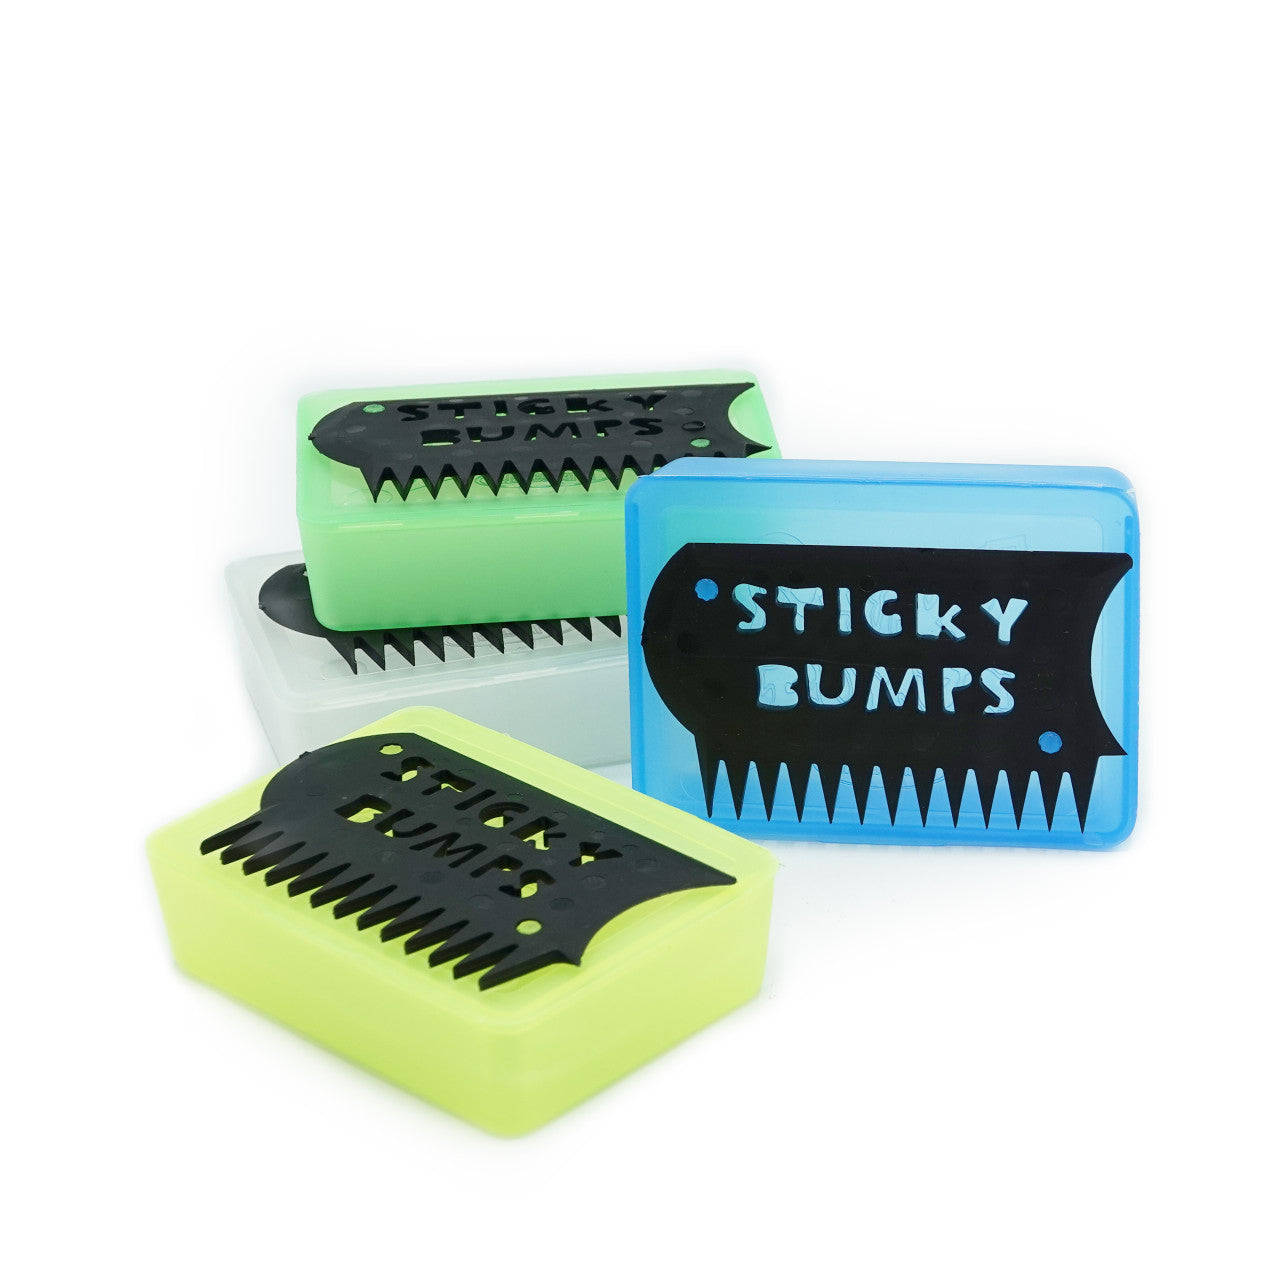 Sticky Bumps Wax Box and Comb - Blue Surf Wax